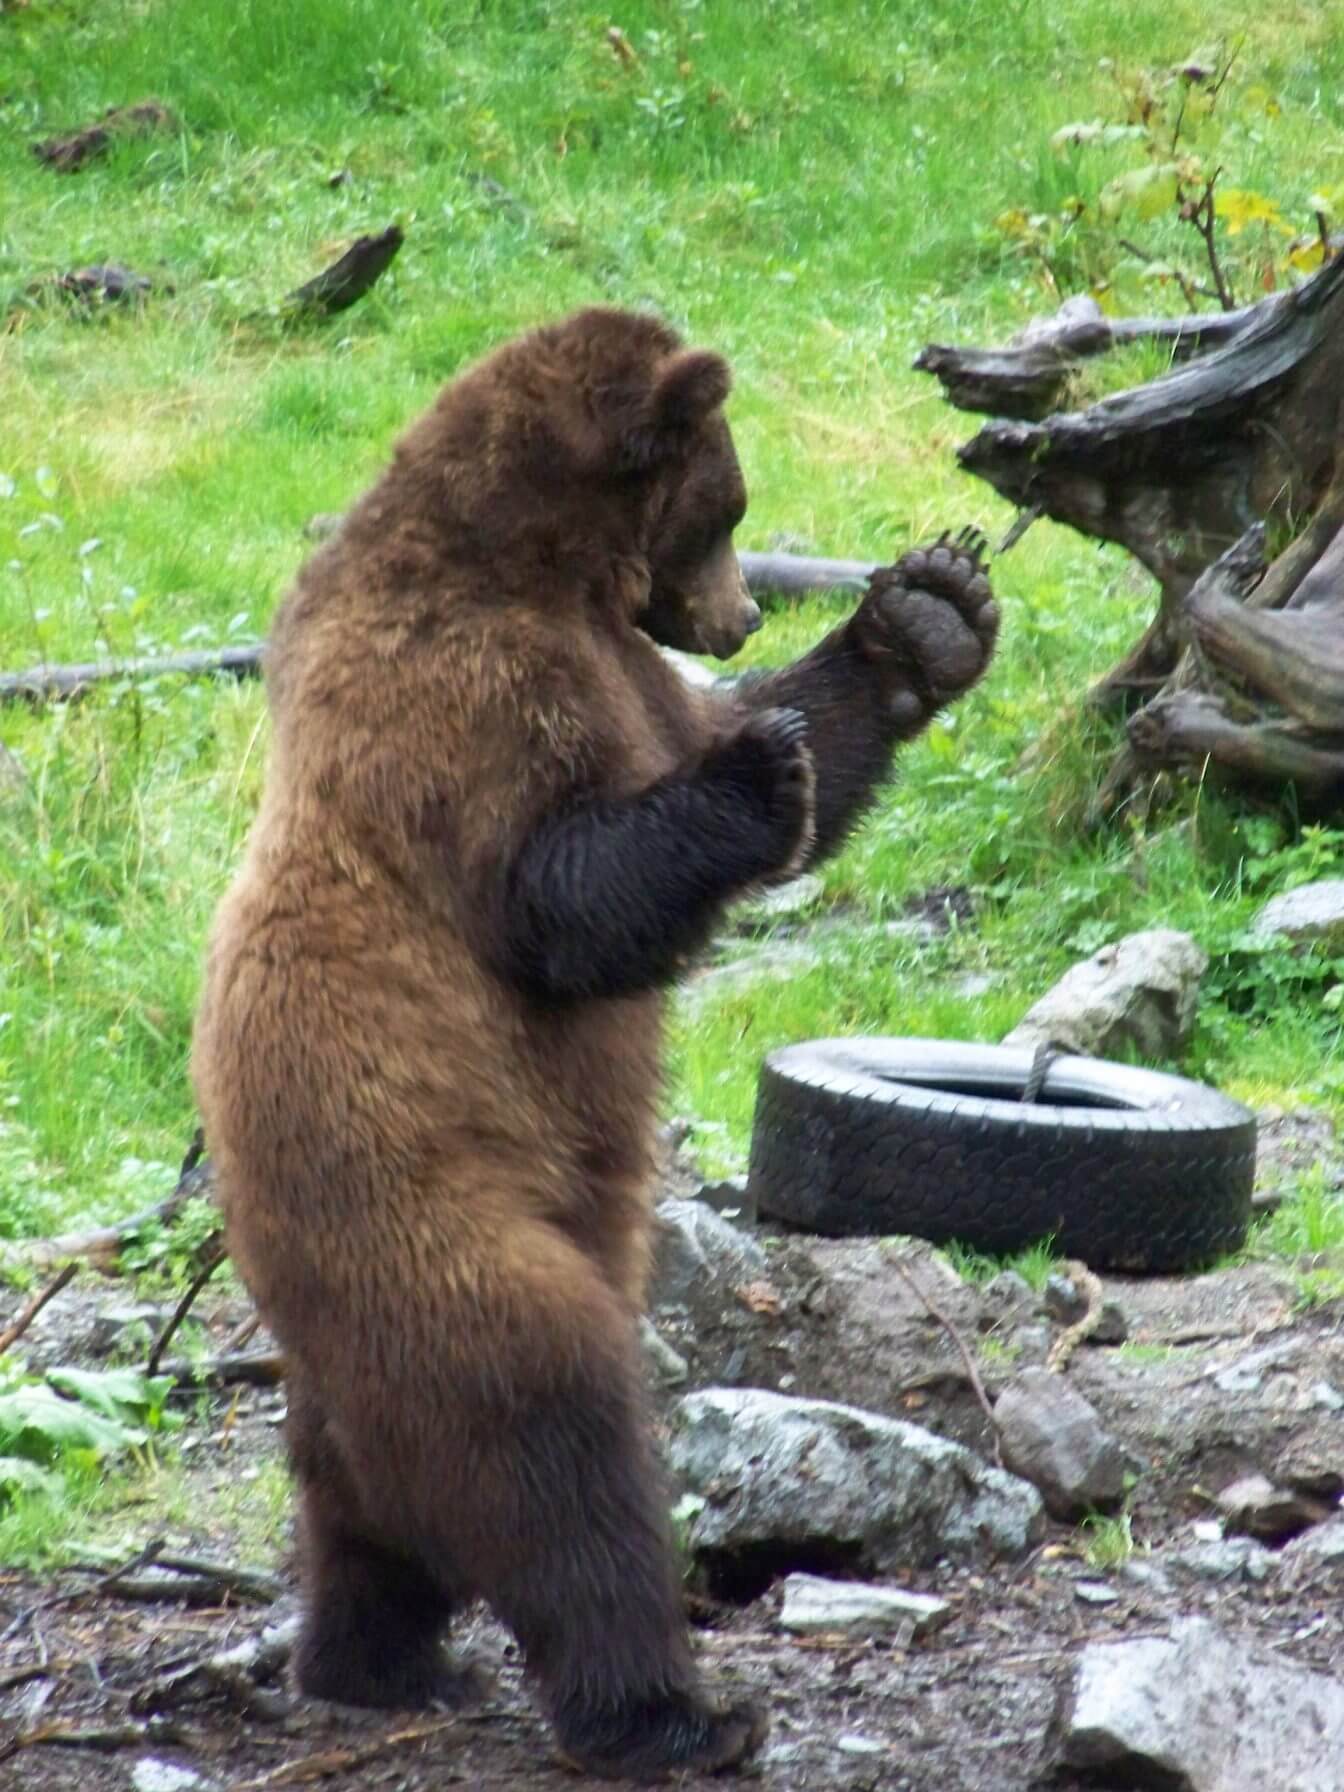 HONORABLE MENTION – Alaska Wildlife “Kung Fu Bear” by Channcie B.